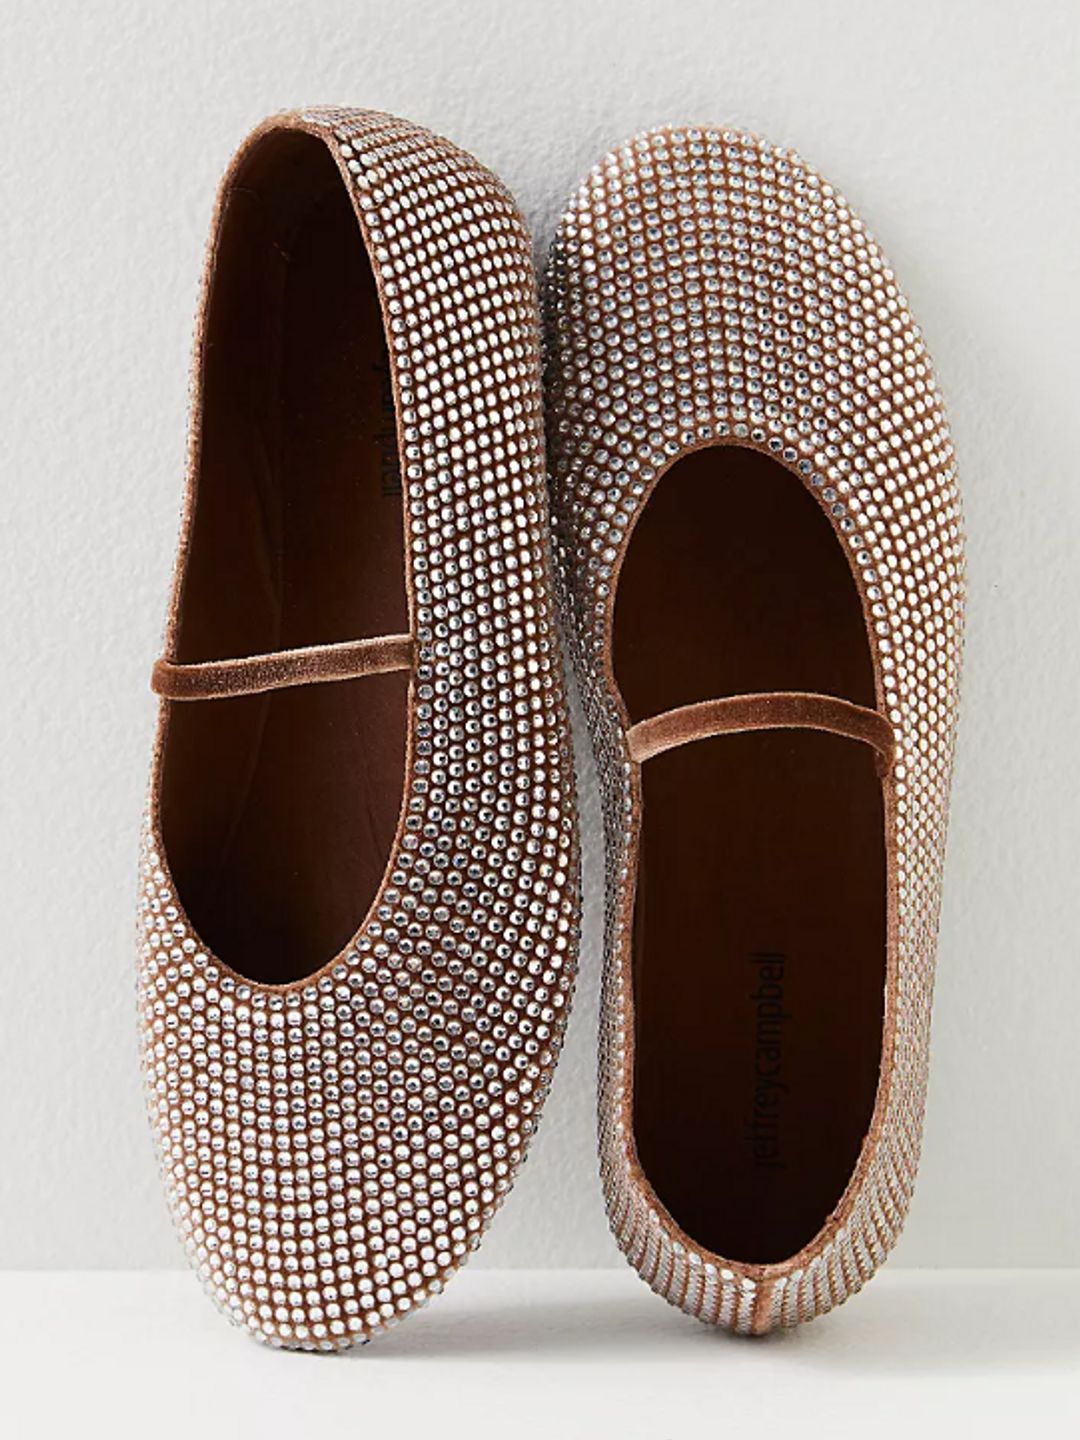 Moira Embellished Party Flats - Free People